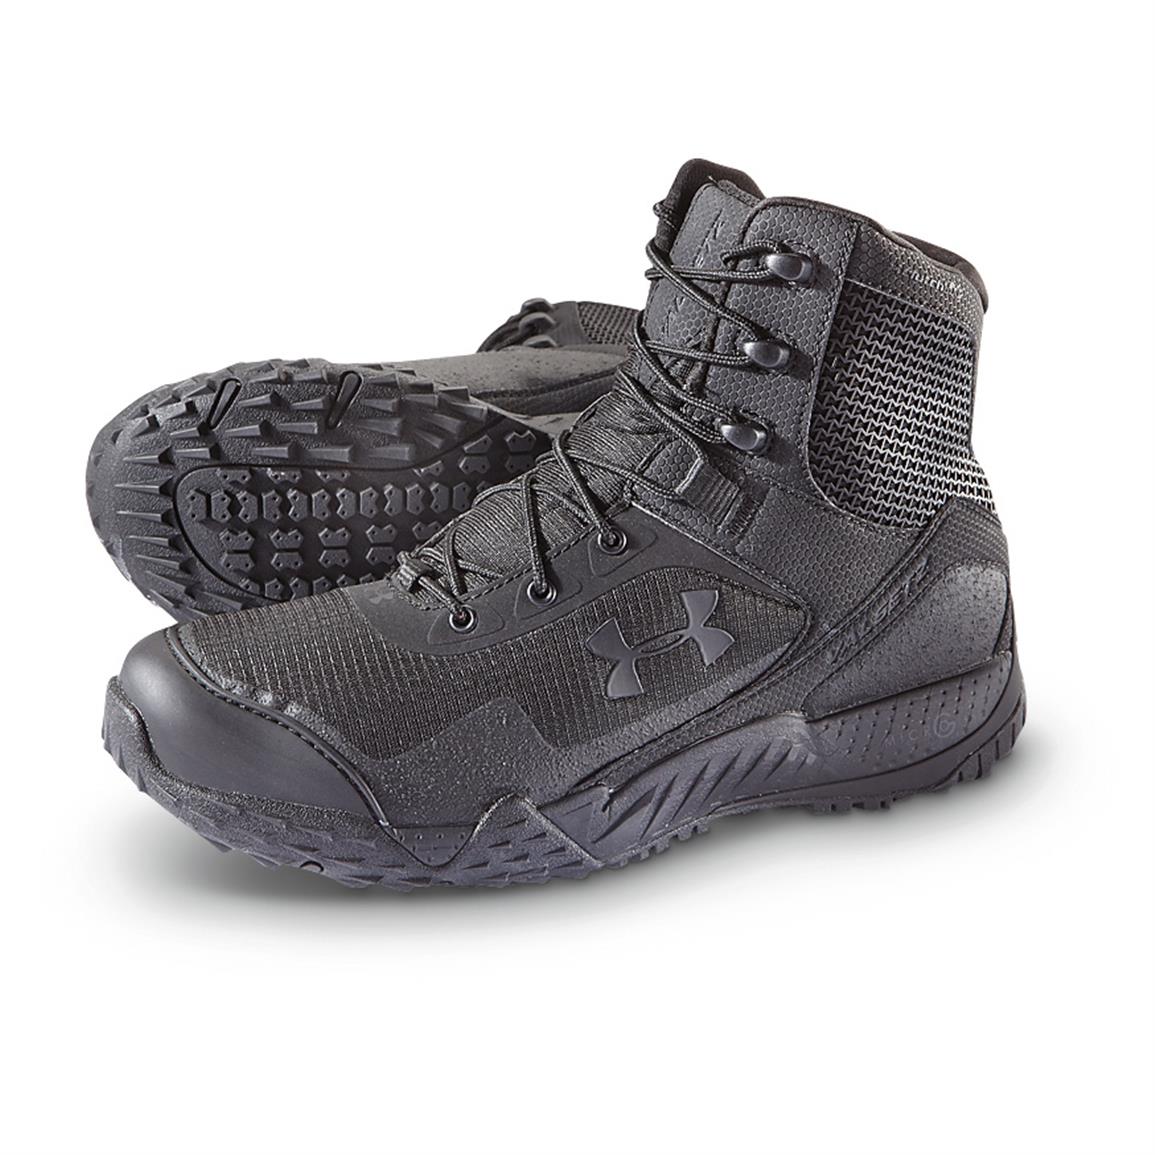 Buy cheap Online - under armor boots military,Fine - Shoes Discount for ...